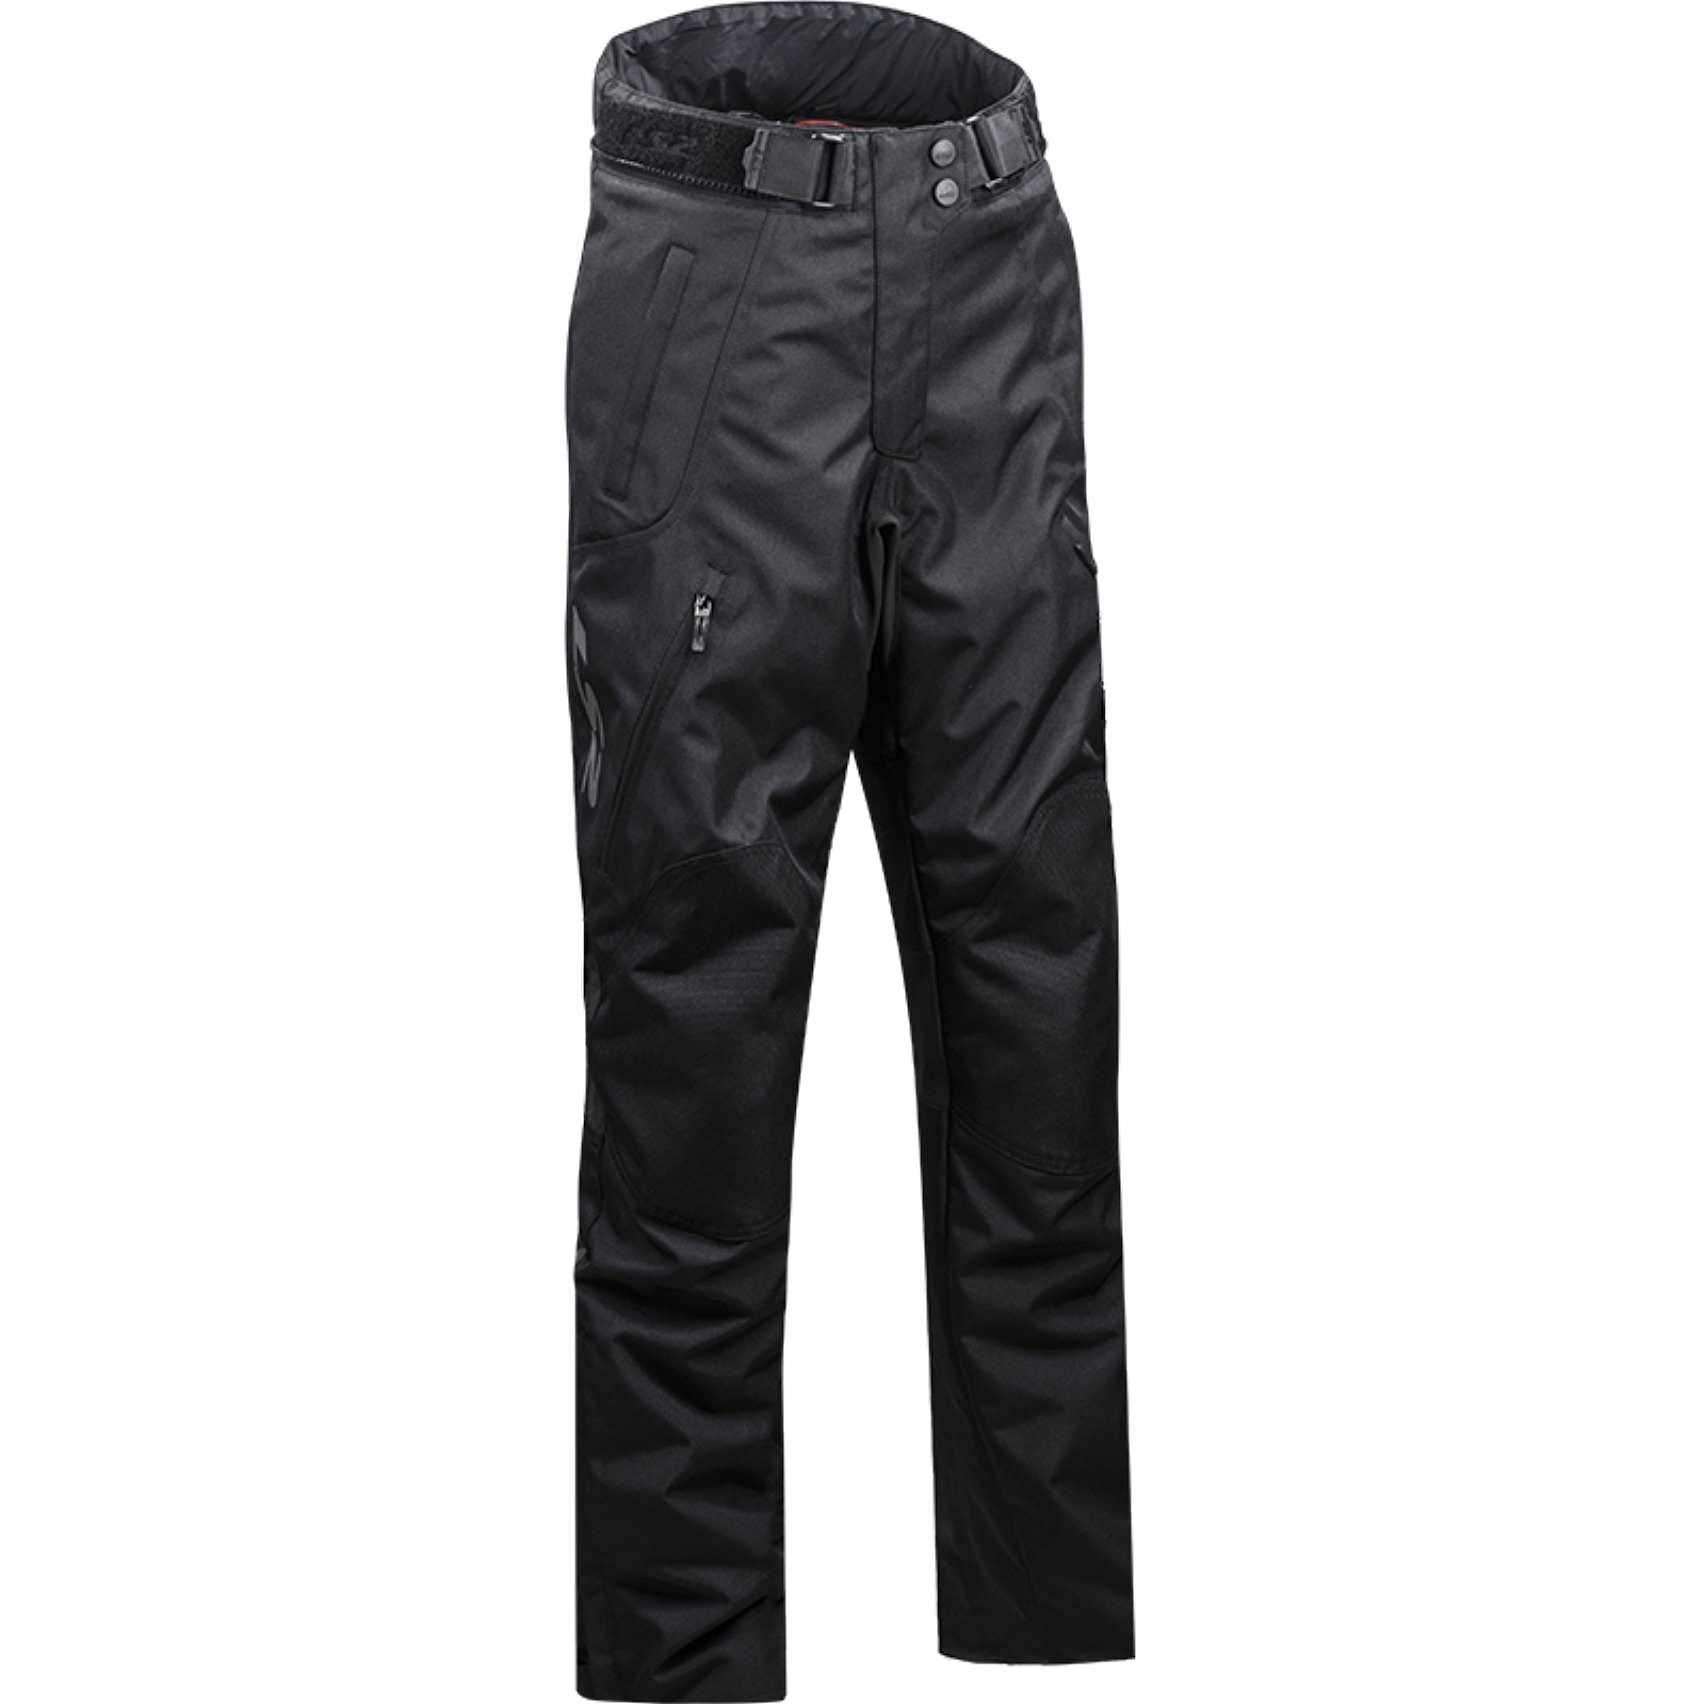 Technical Motorcycle Pants LS2 Chart Evo Lady Black Certificate For ...